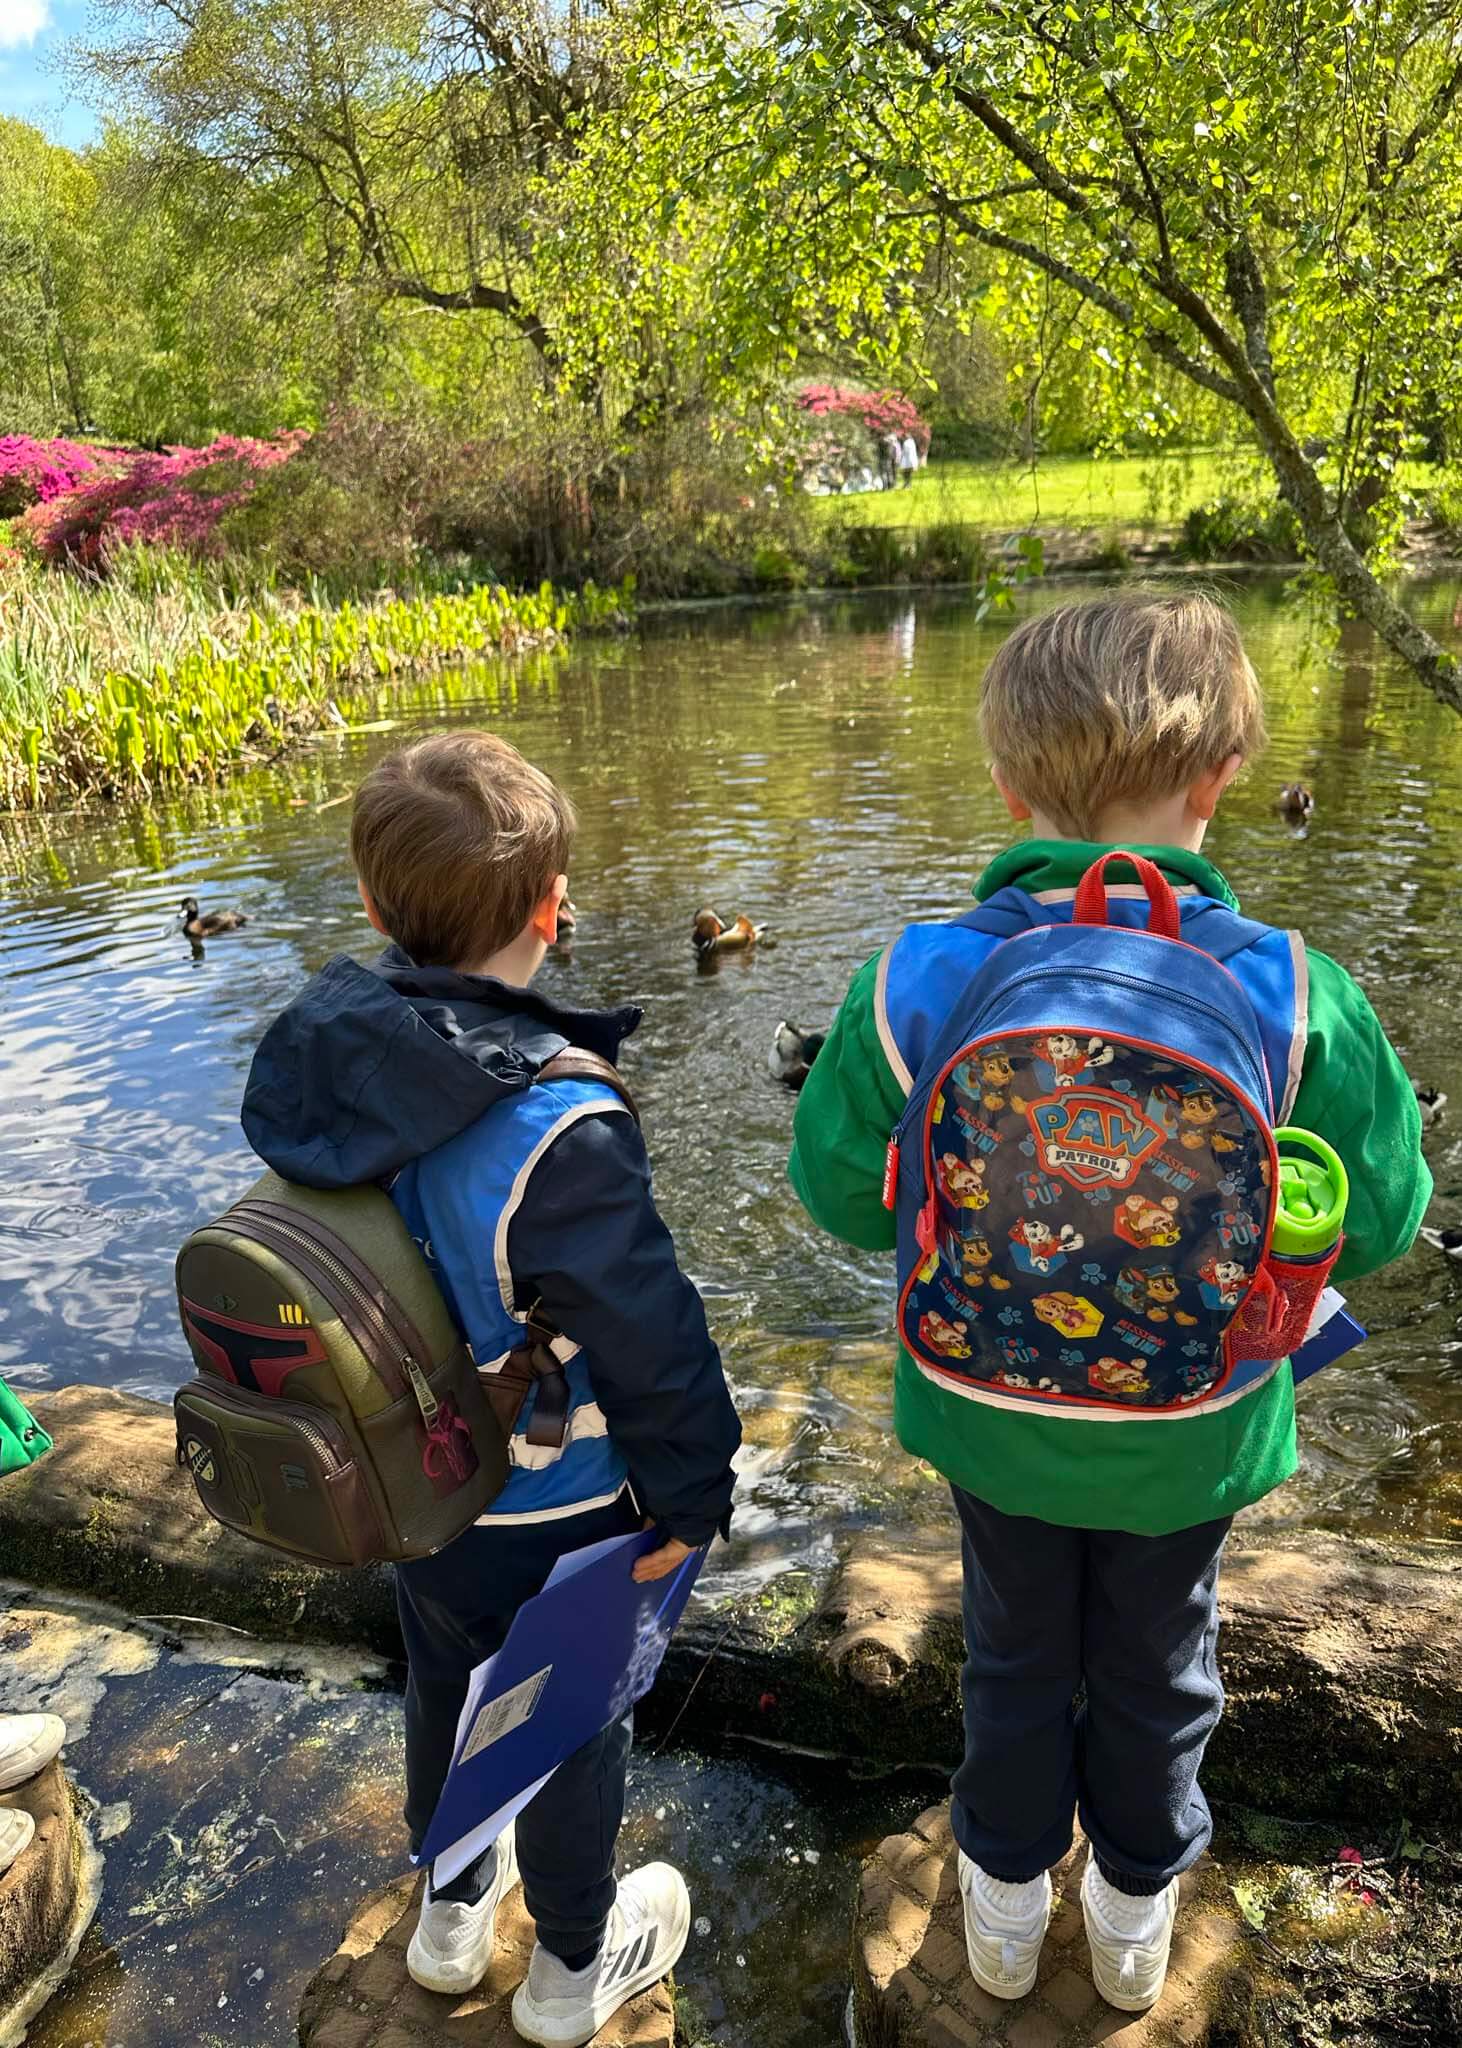 Kindergarten pupil looking at the ducks in the lake | Ibstock Place School, a private school near Richmond, Barnes, Putney, Kingston, and Wandsworth.